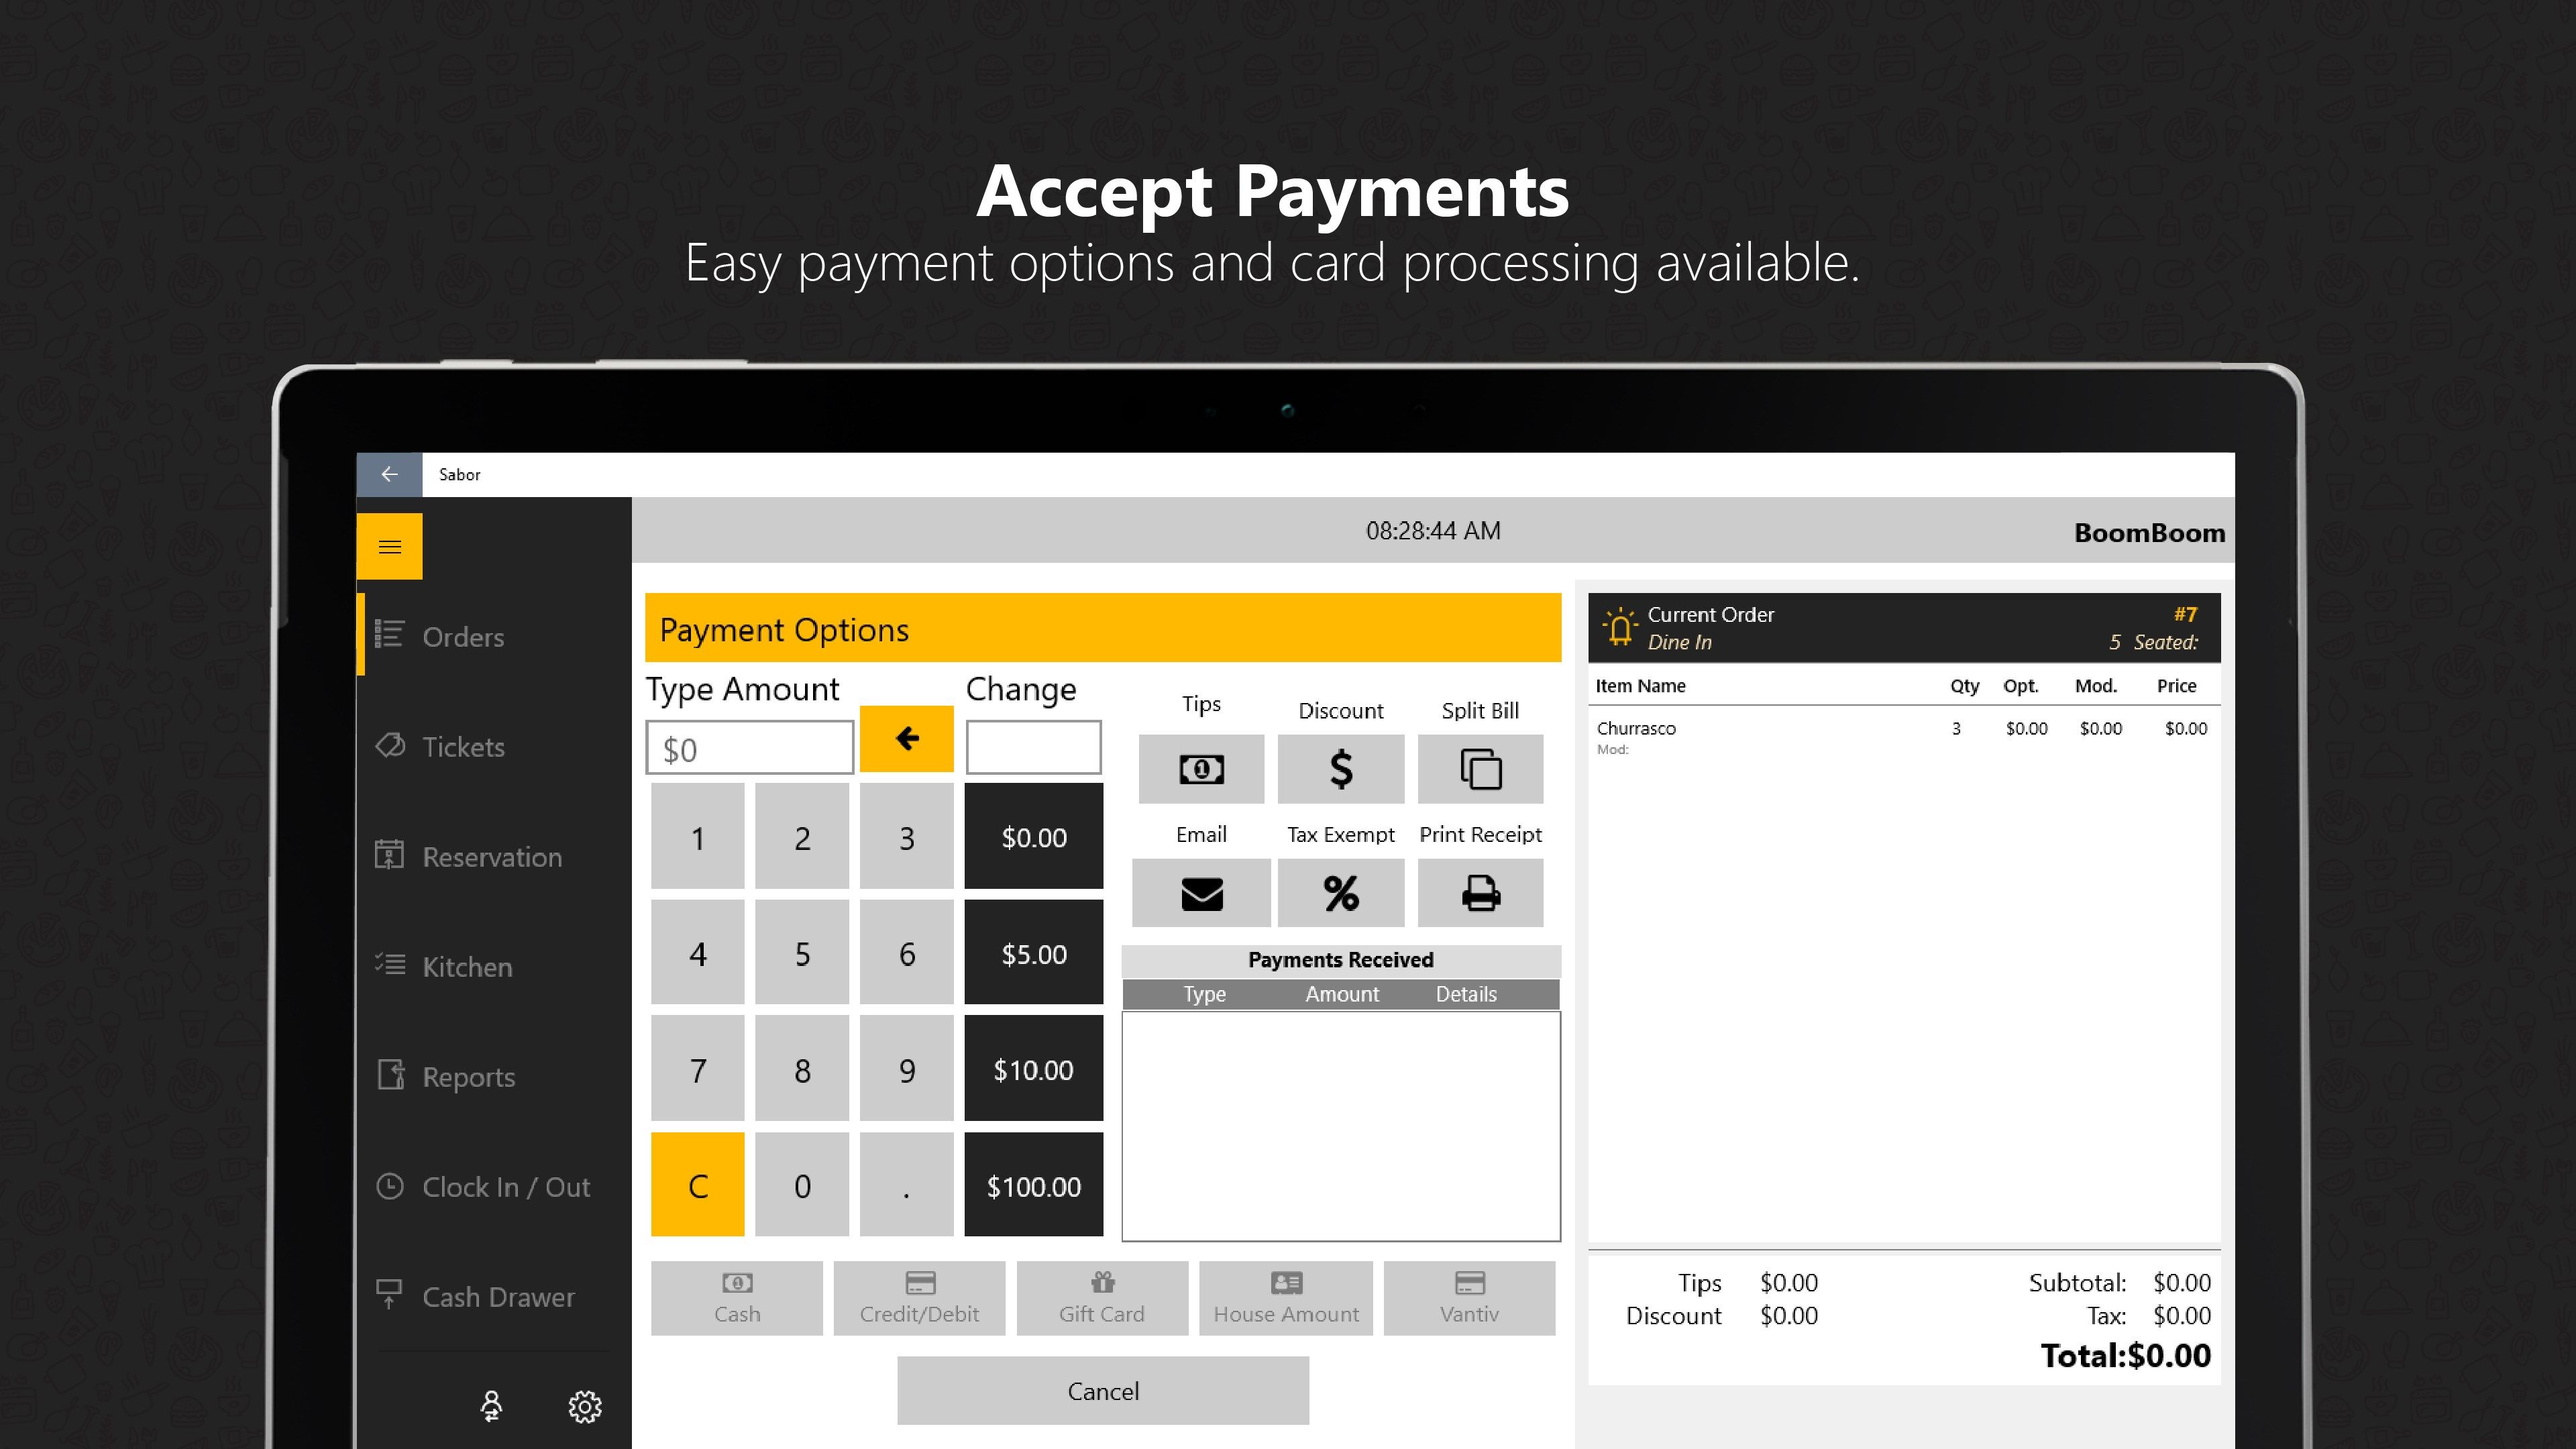 Accepting payments has never been easier - Choose cash / card / house account / or build in gift card system